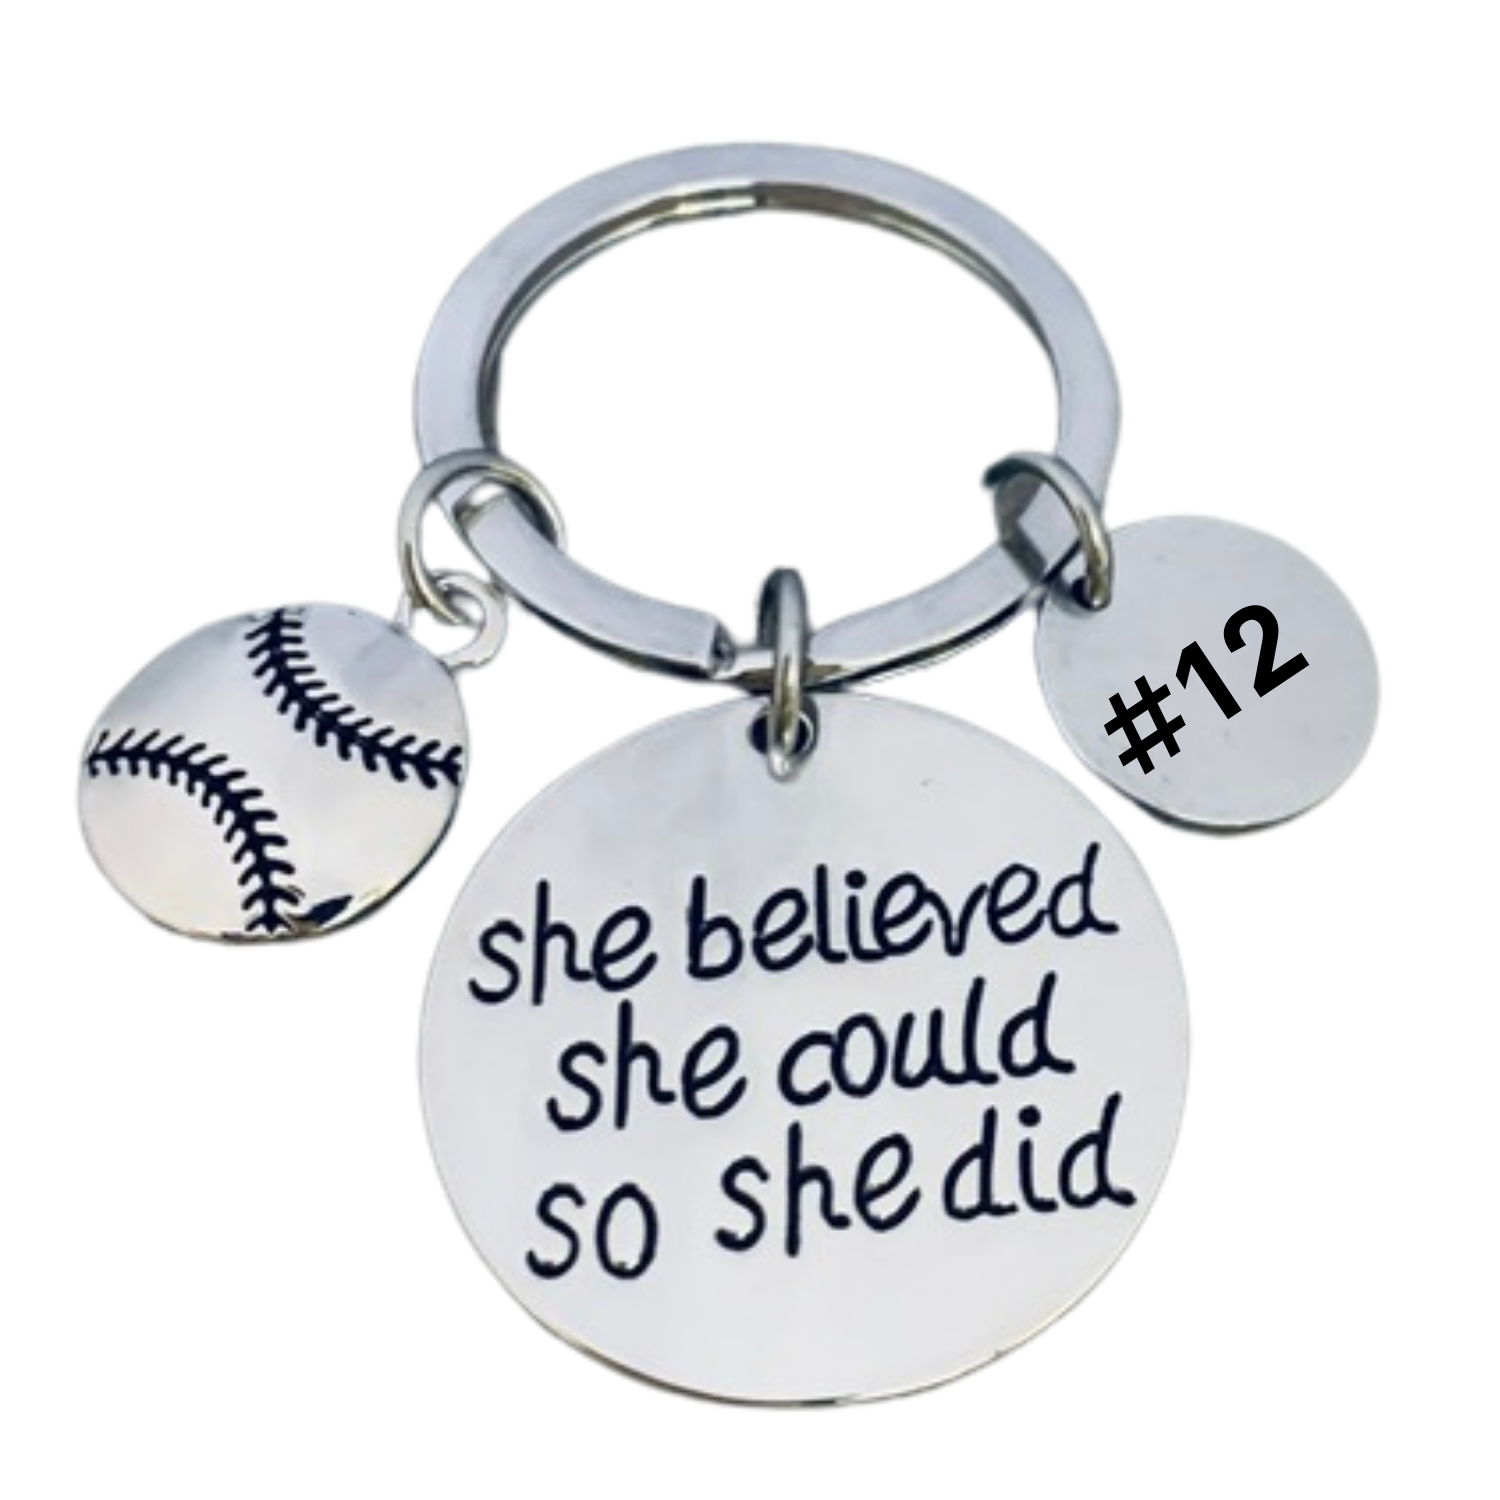 Girls Personalized Softball Round Keychain with Number Engraved Charm